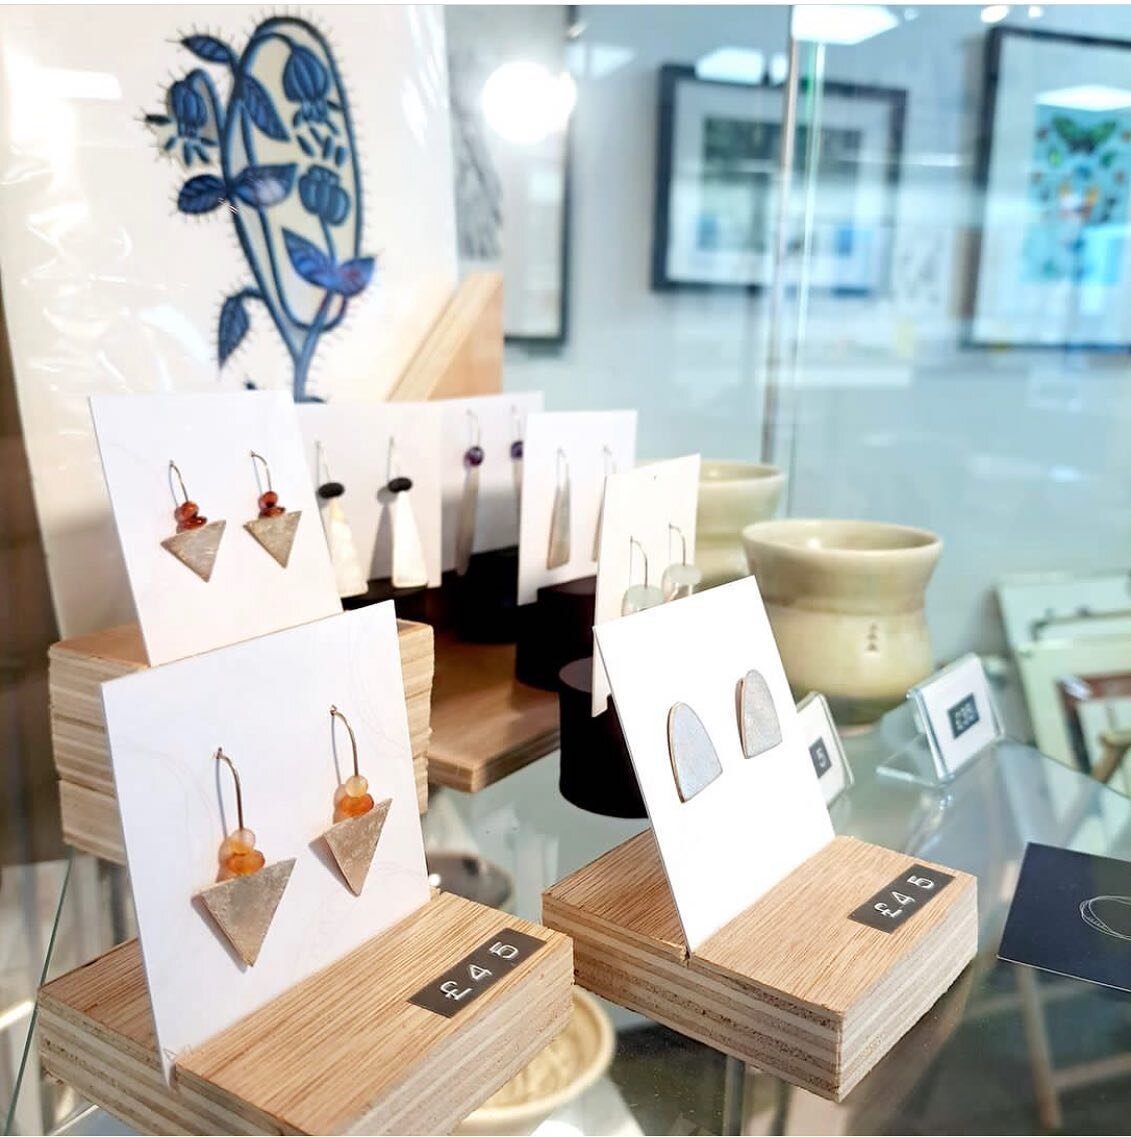 Very happy to see my jewellery on display at @yeovilartspace getting lots of attention in the run up to🎄

📷@yeovilartspace